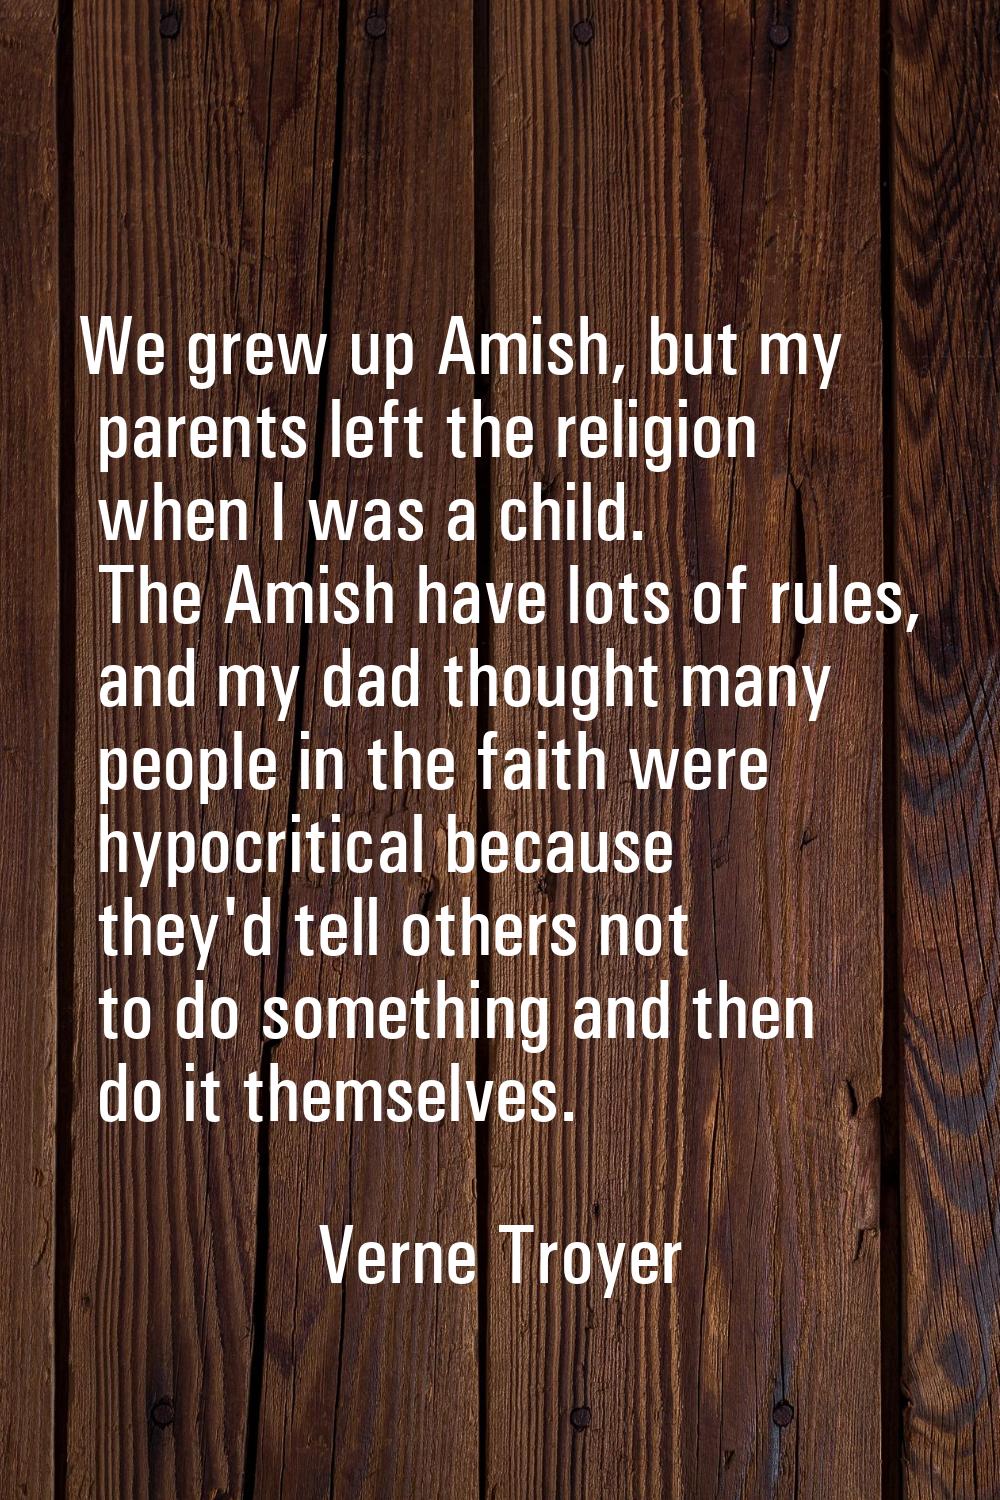 We grew up Amish, but my parents left the religion when I was a child. The Amish have lots of rules